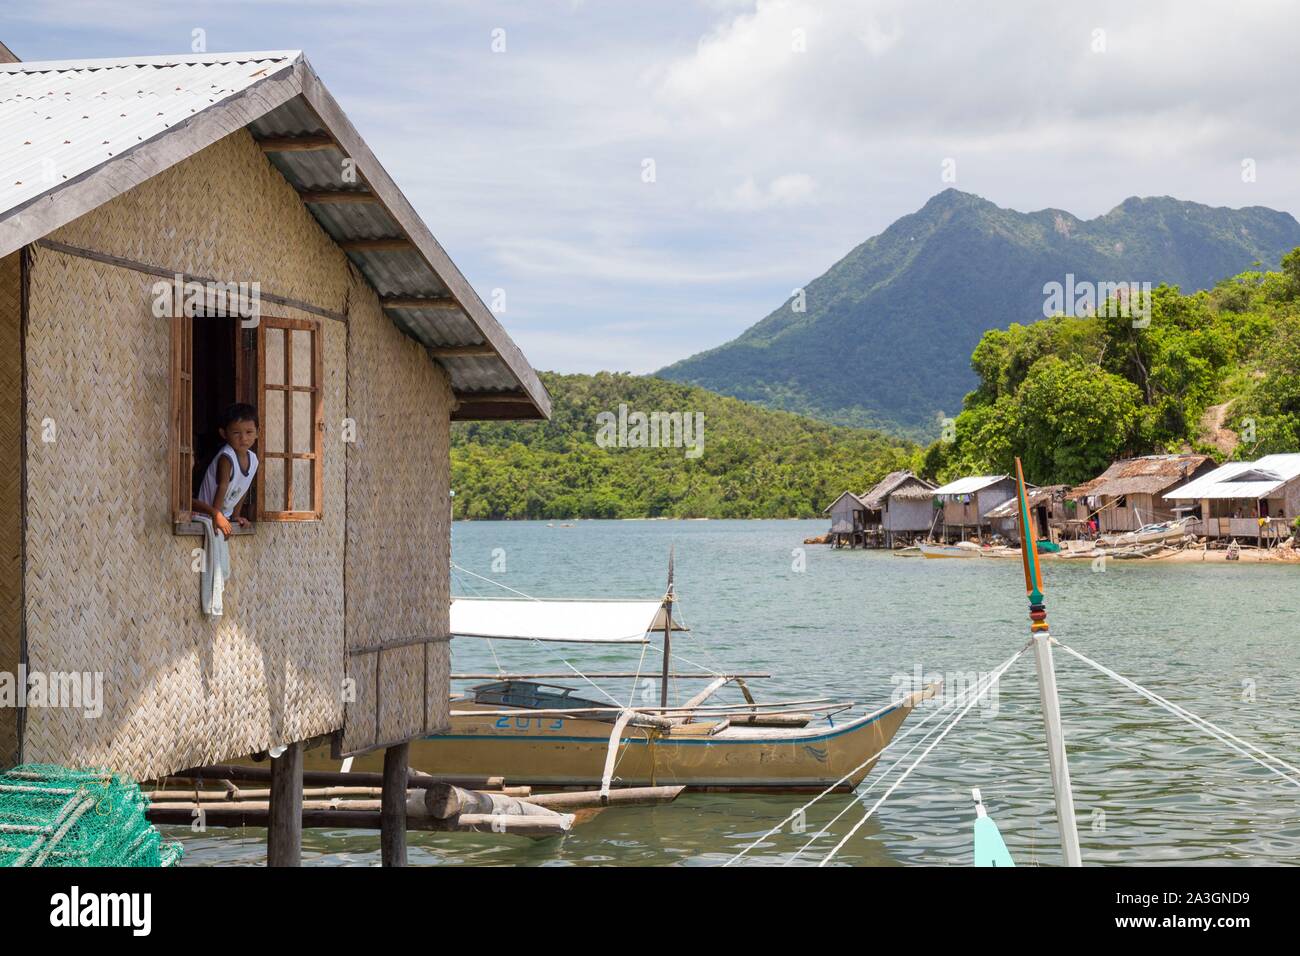 Philippines, Palawan, Malampaya Sound Protected Landscape and Seascape, fishermen village on a small island in the middle of the sound Stock Photo